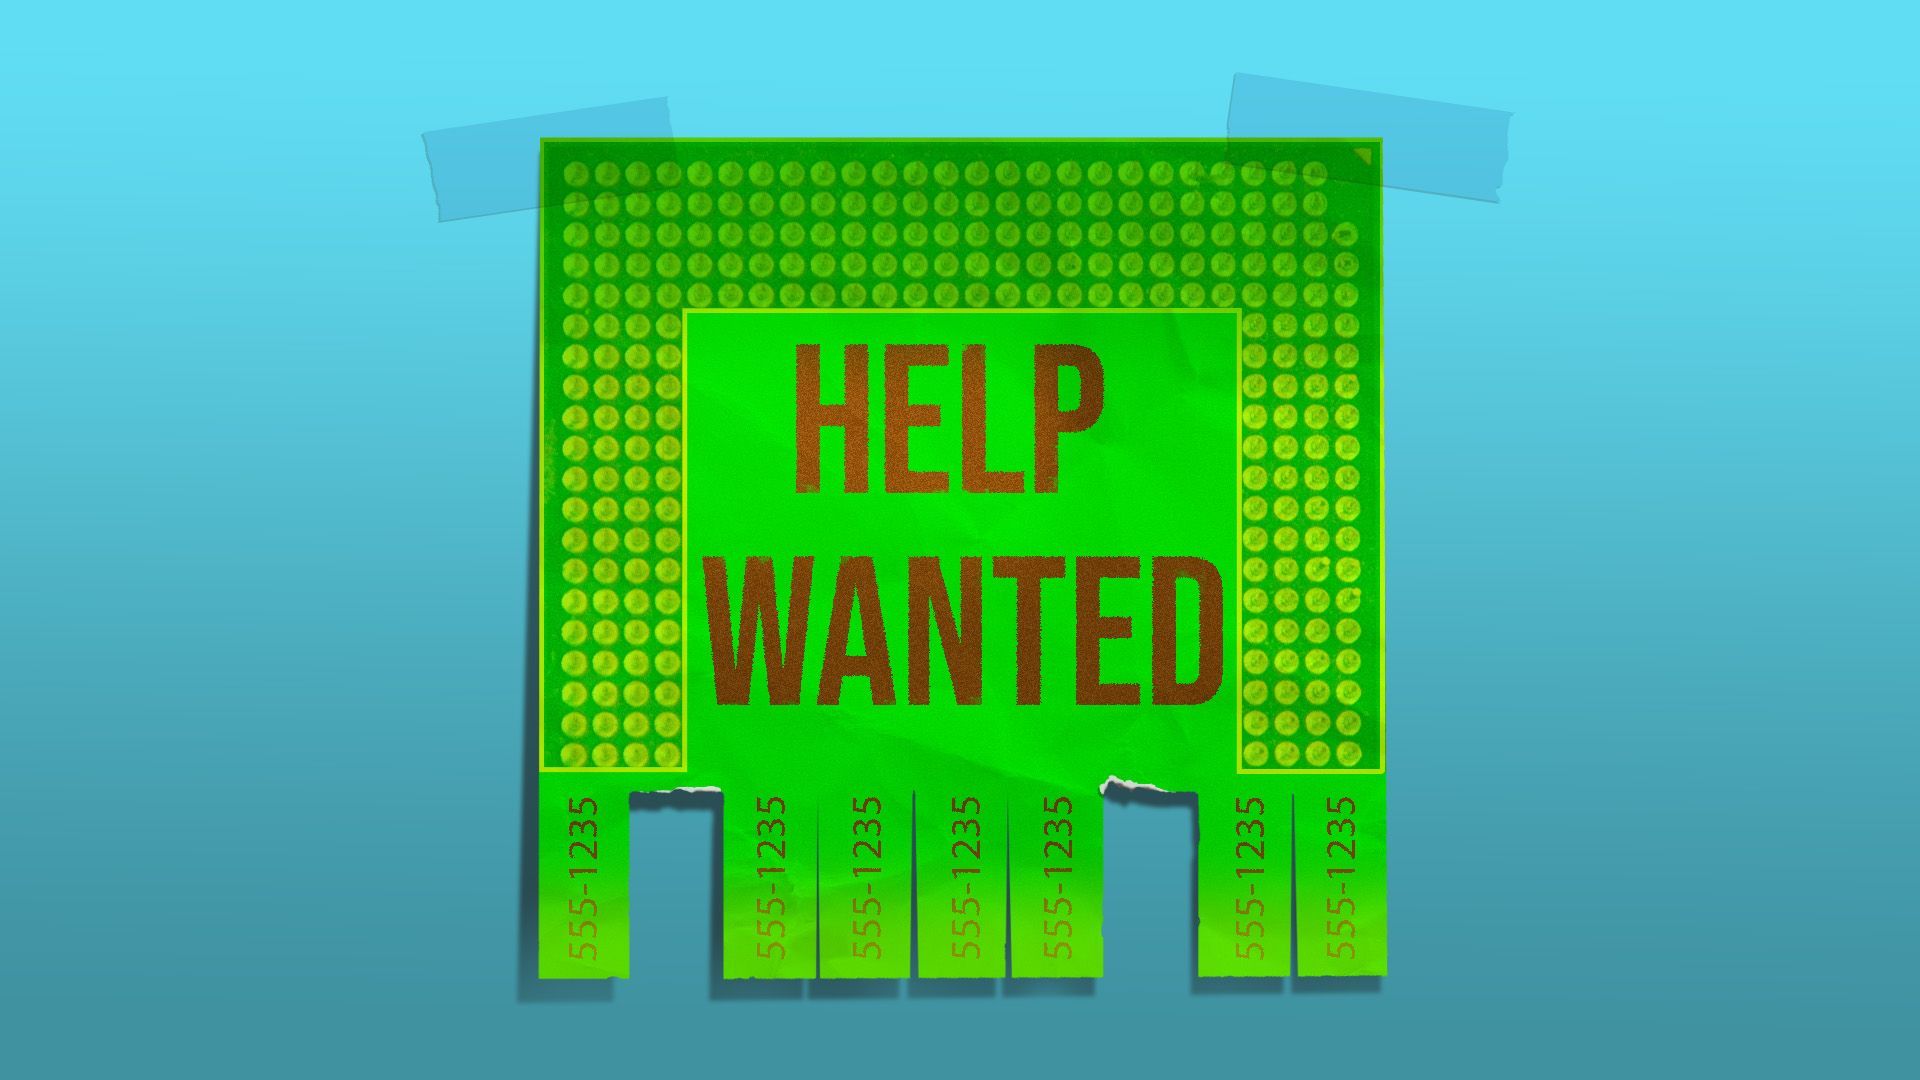 Illustration of a help wanted sign in the shape of a computer chip